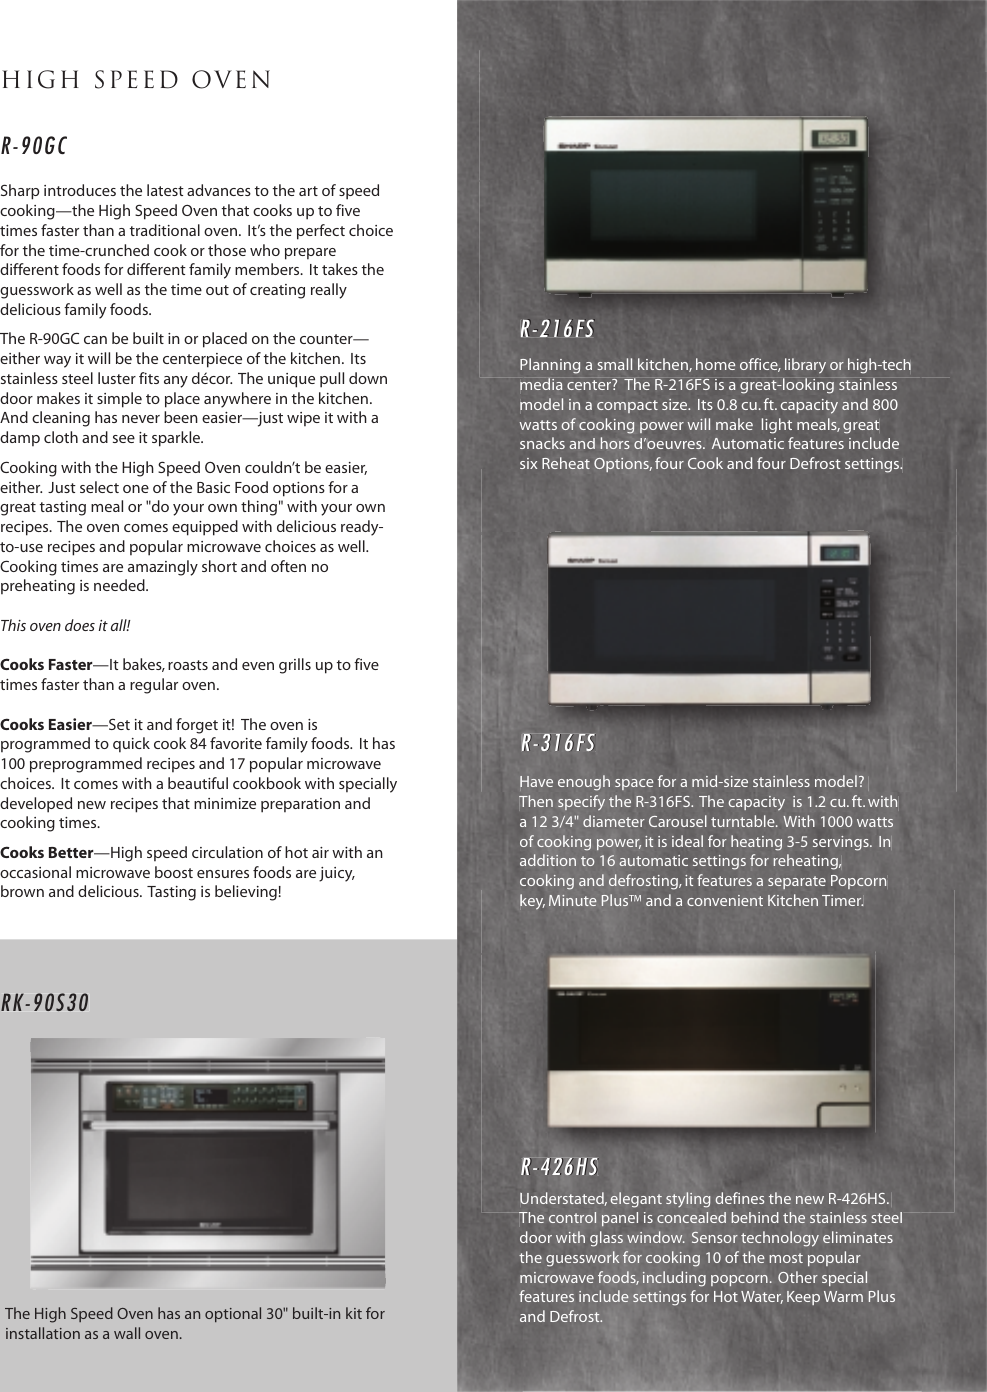 Page 4 of 5 - Sharp Sharp-Stainless-Steel-Microwave-Oven-Users-Manual- Stainless Steel Microwave Oven Brochure  Sharp-stainless-steel-microwave-oven-users-manual